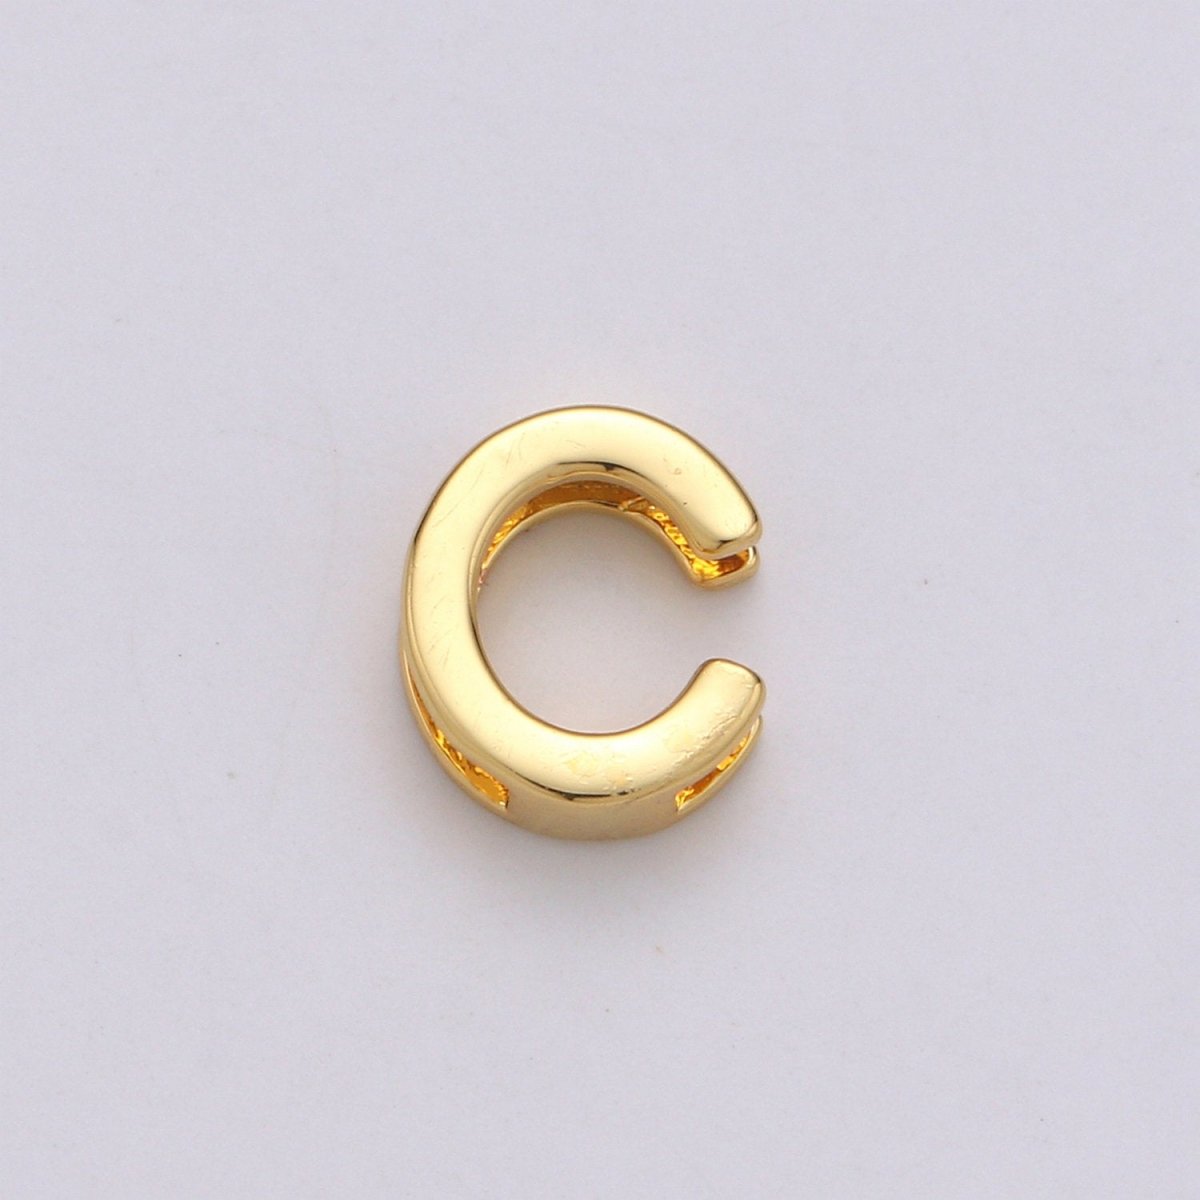 Slider Initial Charm 14k Gold Filled Letter Charm 6.5x7.8mm Slide Bracelet Necklace Jewelry Making Supply Personalize Jewelry Minimalist A-157 to A-169 - DLUXCA